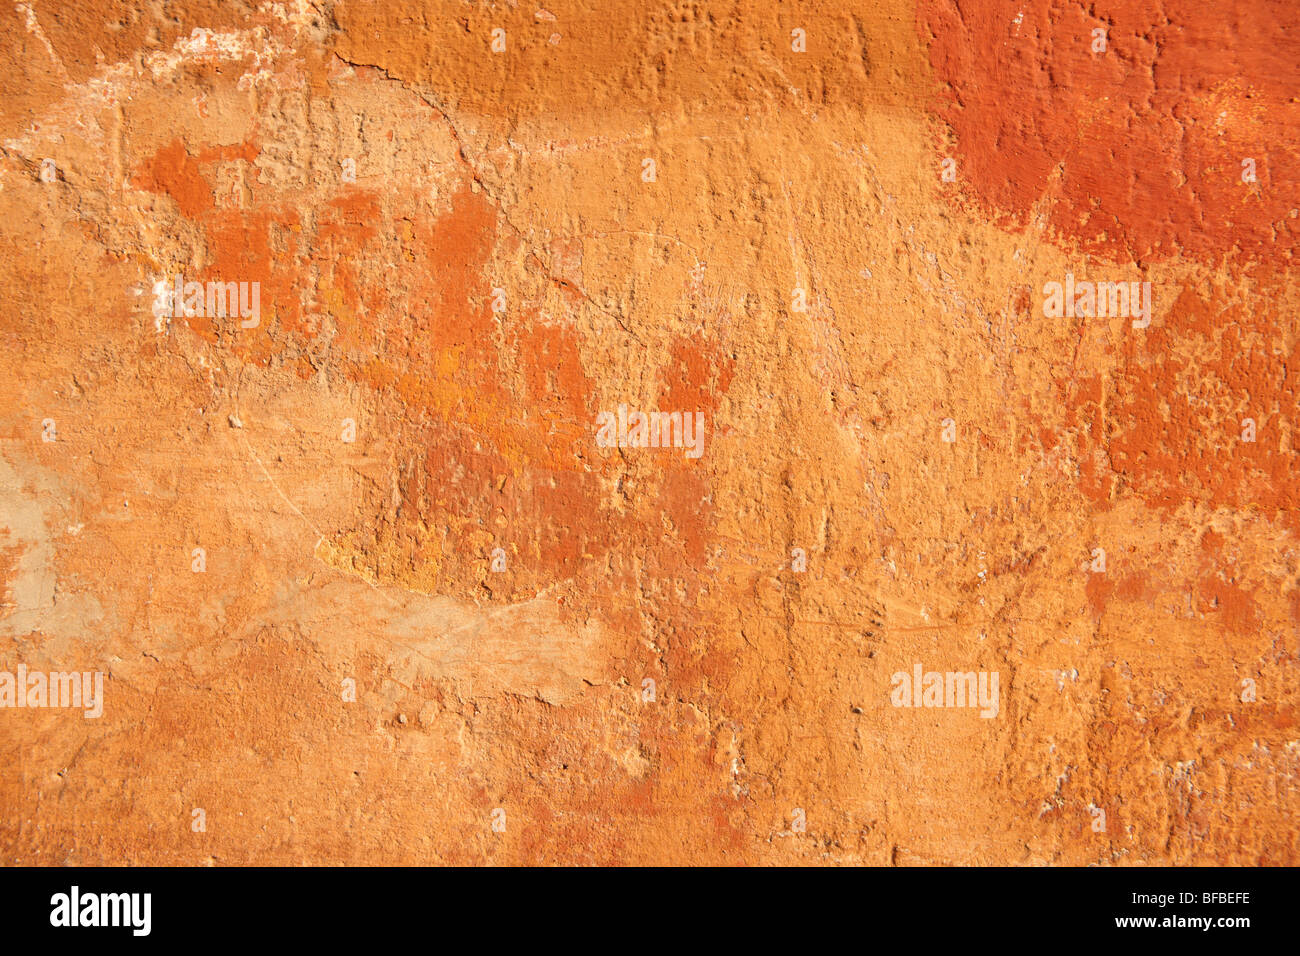 Orange yellow painted plater wall with ageing paint surface, rustic texture Stock Photo